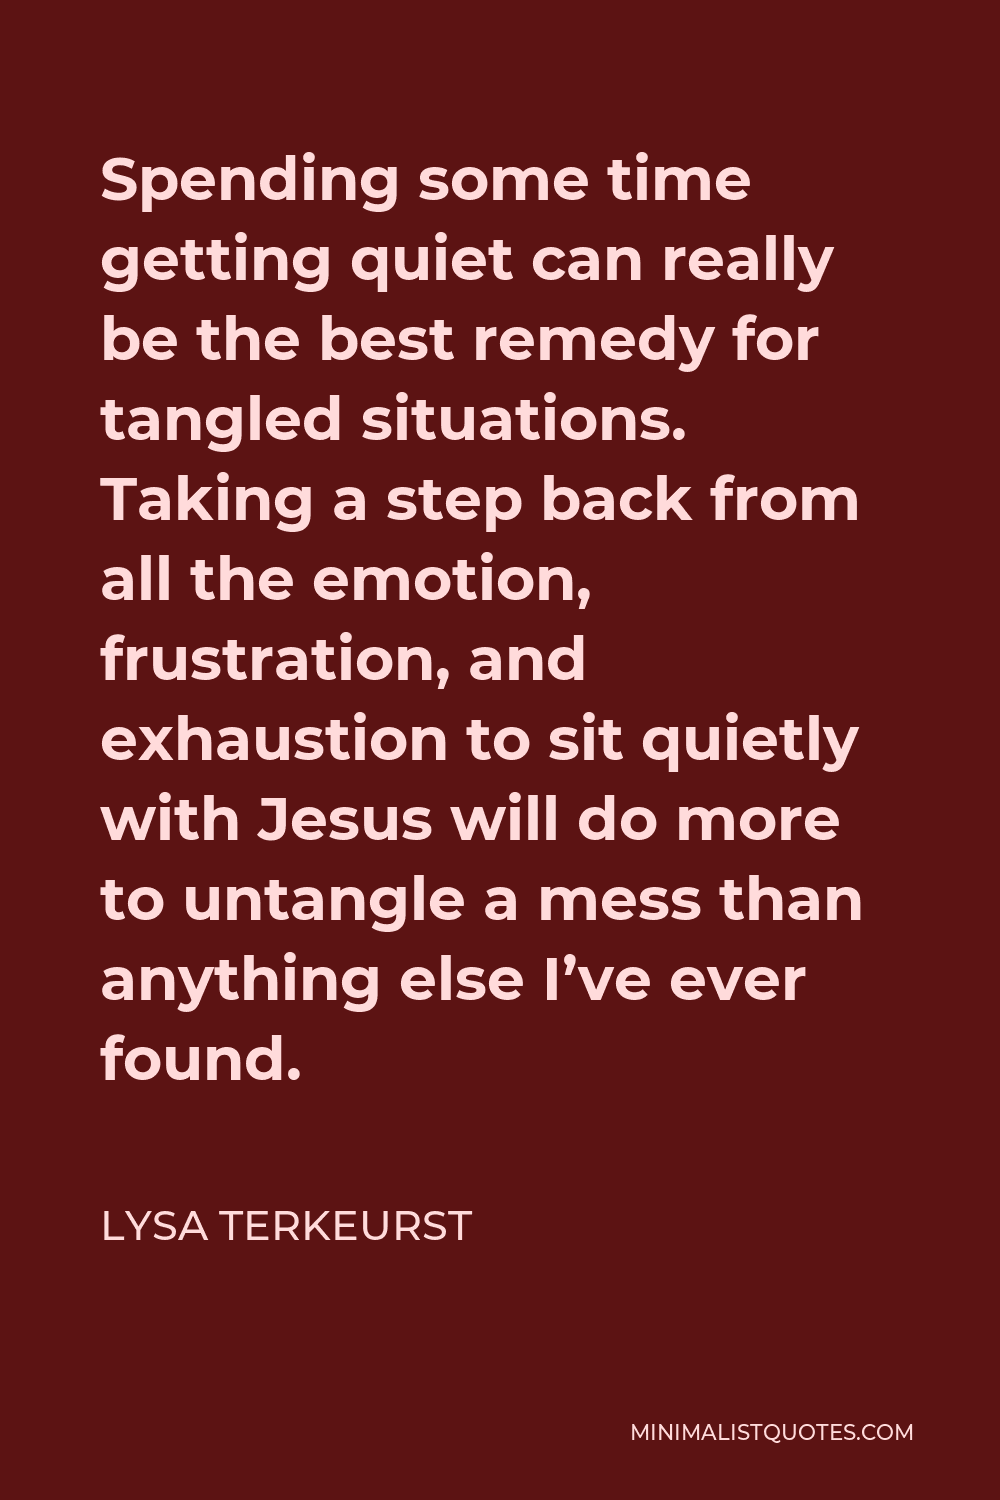 Lysa TerKeurst Quote - Spending some time getting quiet can really be the best remedy for tangled situations. Taking a step back from all the emotion, frustration, and exhaustion to sit quietly with Jesus will do more to untangle a mess than anything else I’ve ever found.